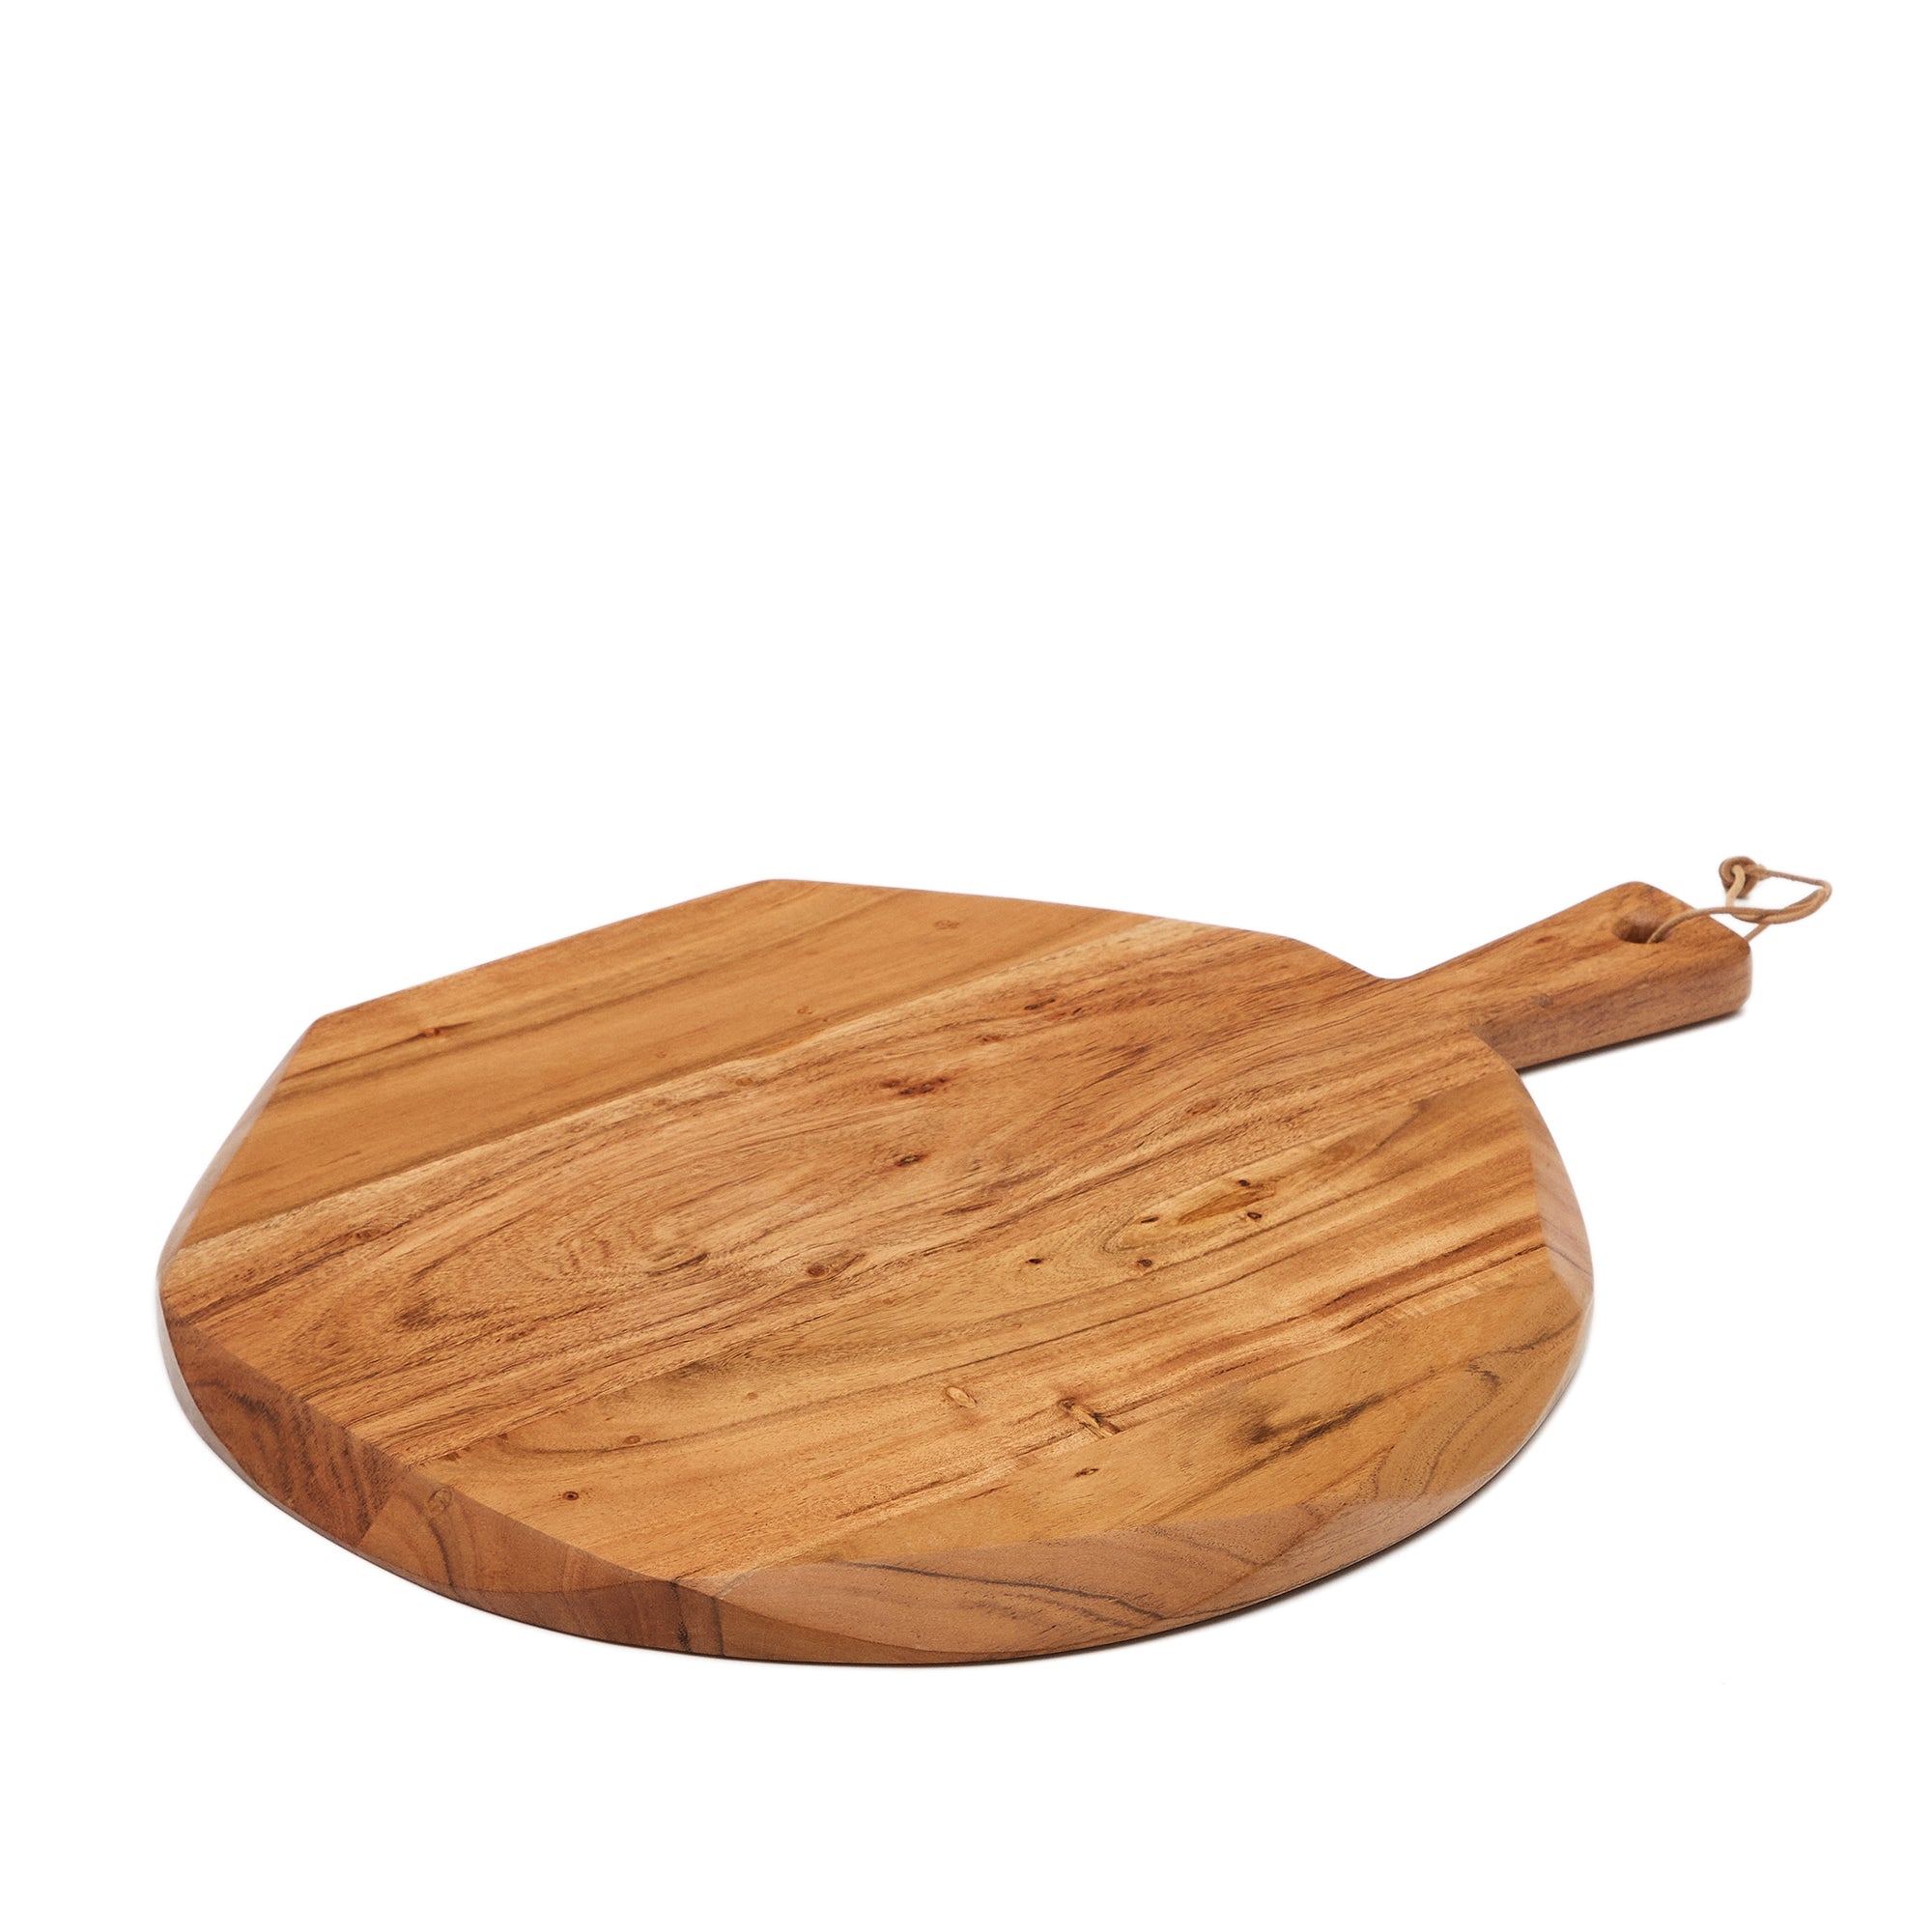 Lidiana large solid acacia wood serving board